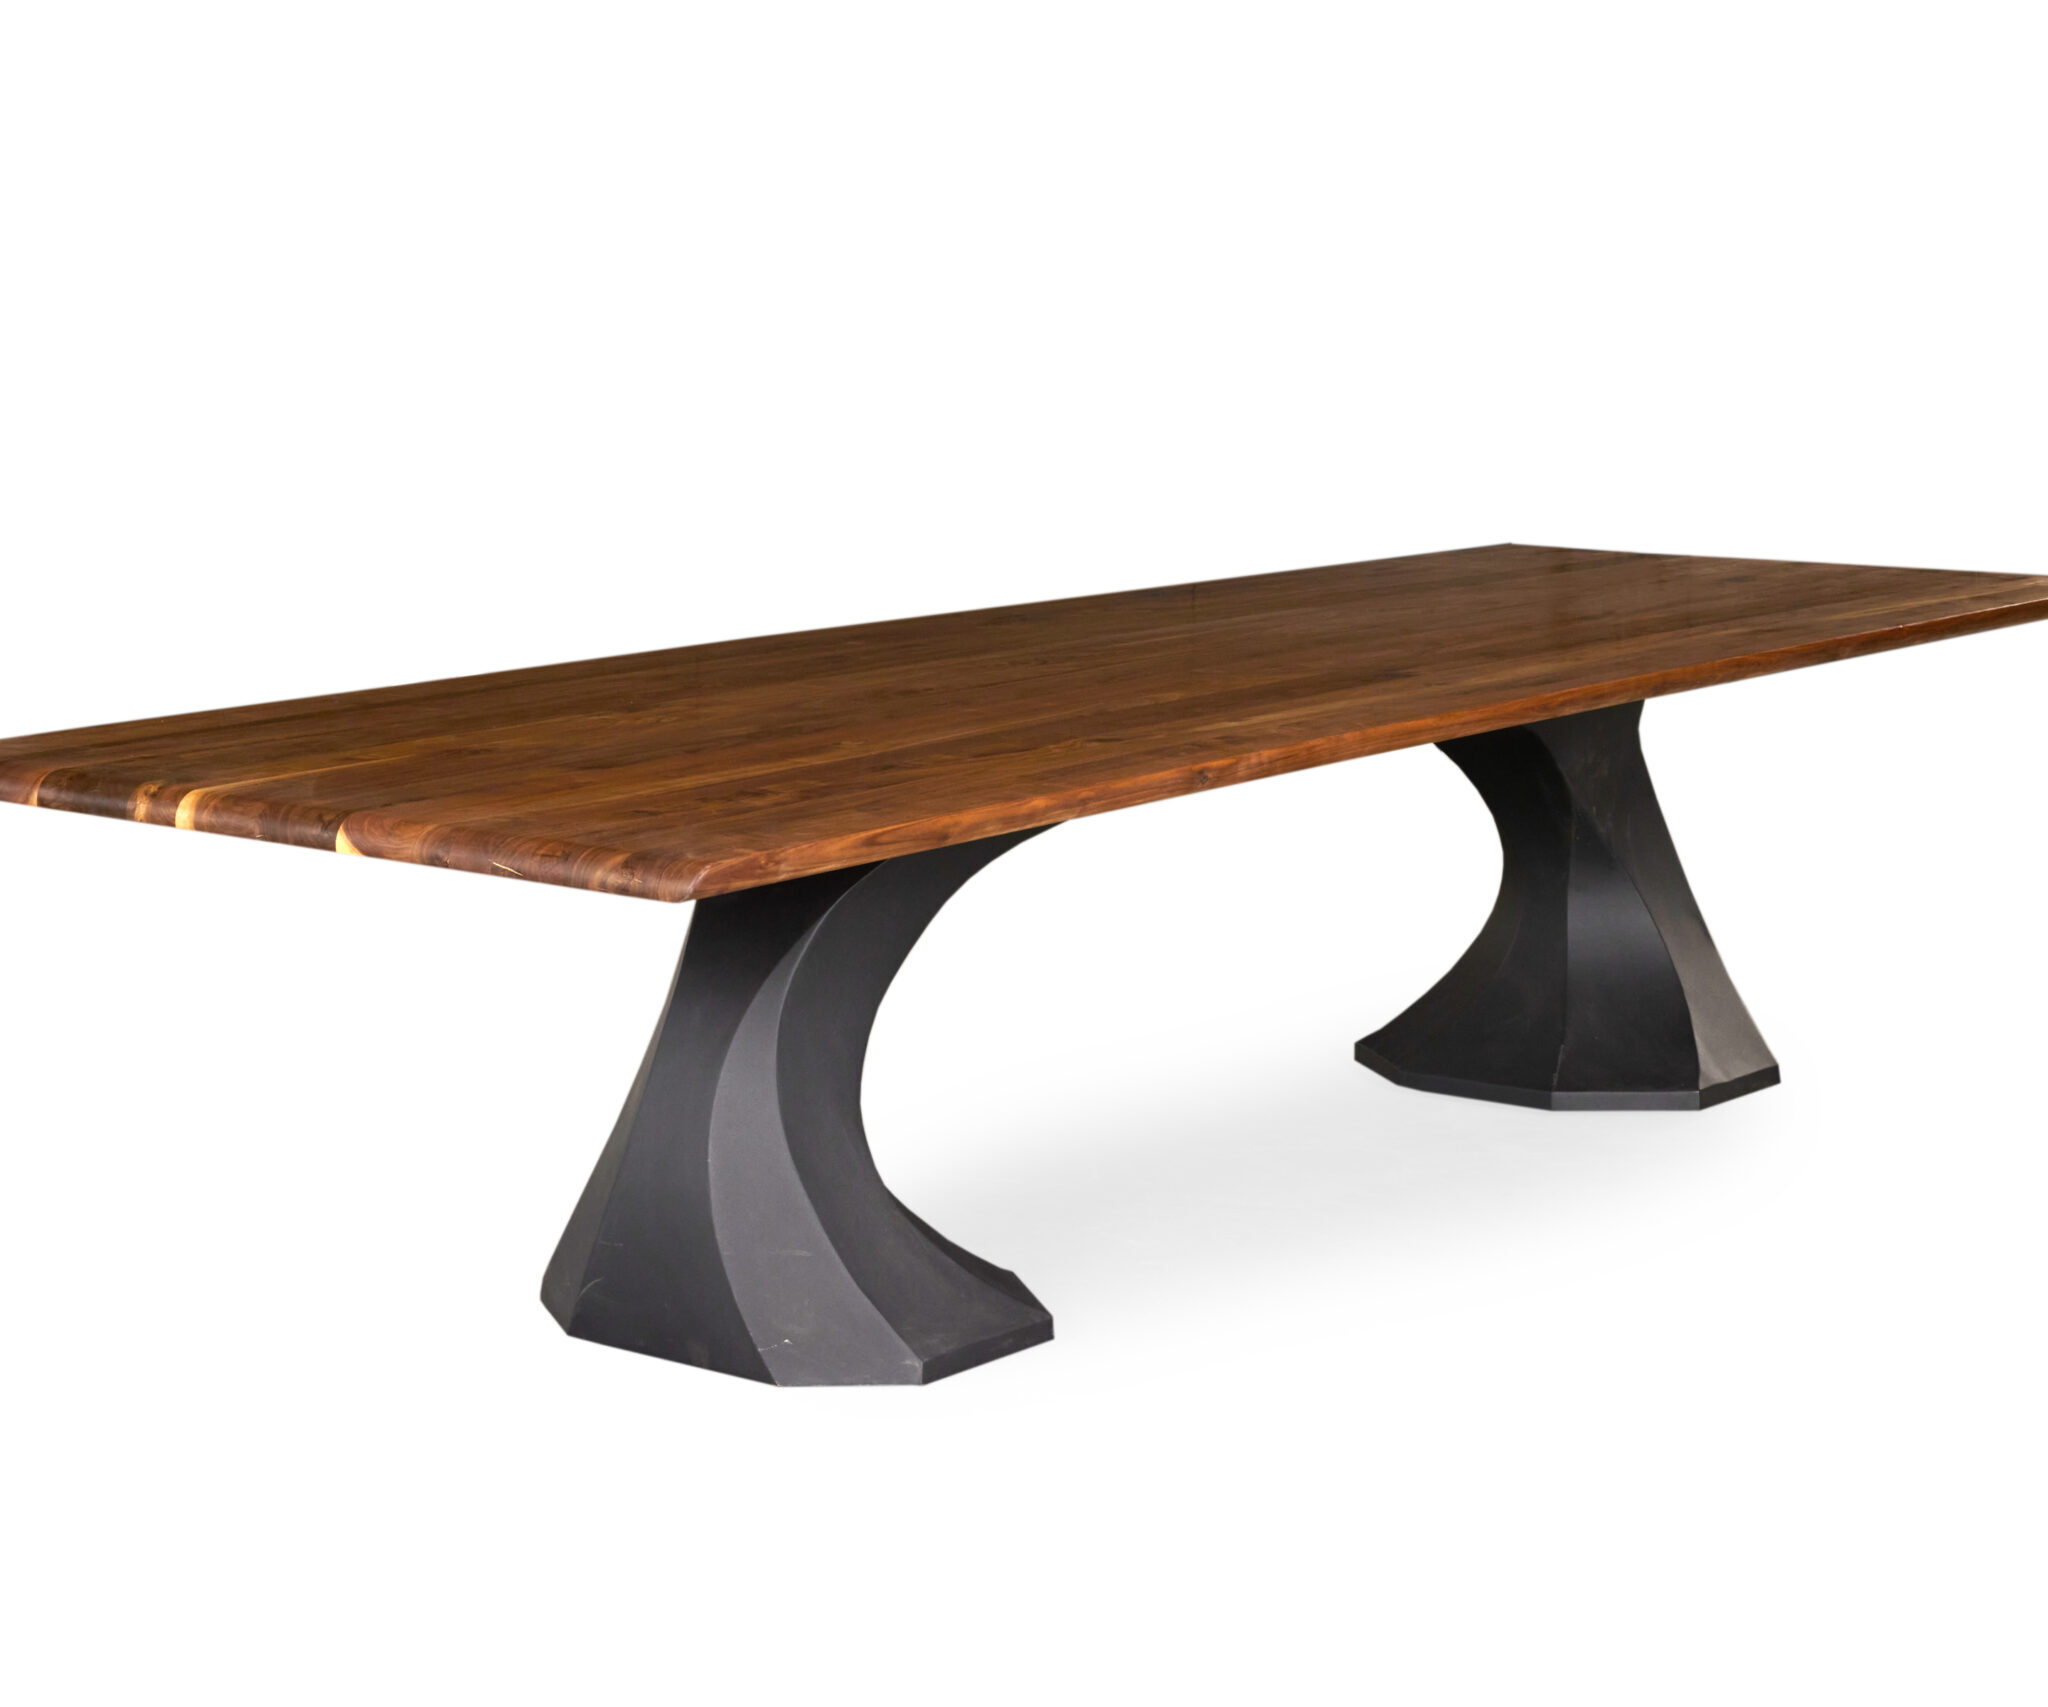 Luxe Dining Table Walnut timber dimensions L 3600mm x W 1200mm x H 750mm Elsternwick edge natural oil finish supported by Positano Leg Steel base This alt text succinctly describes the key features of the table